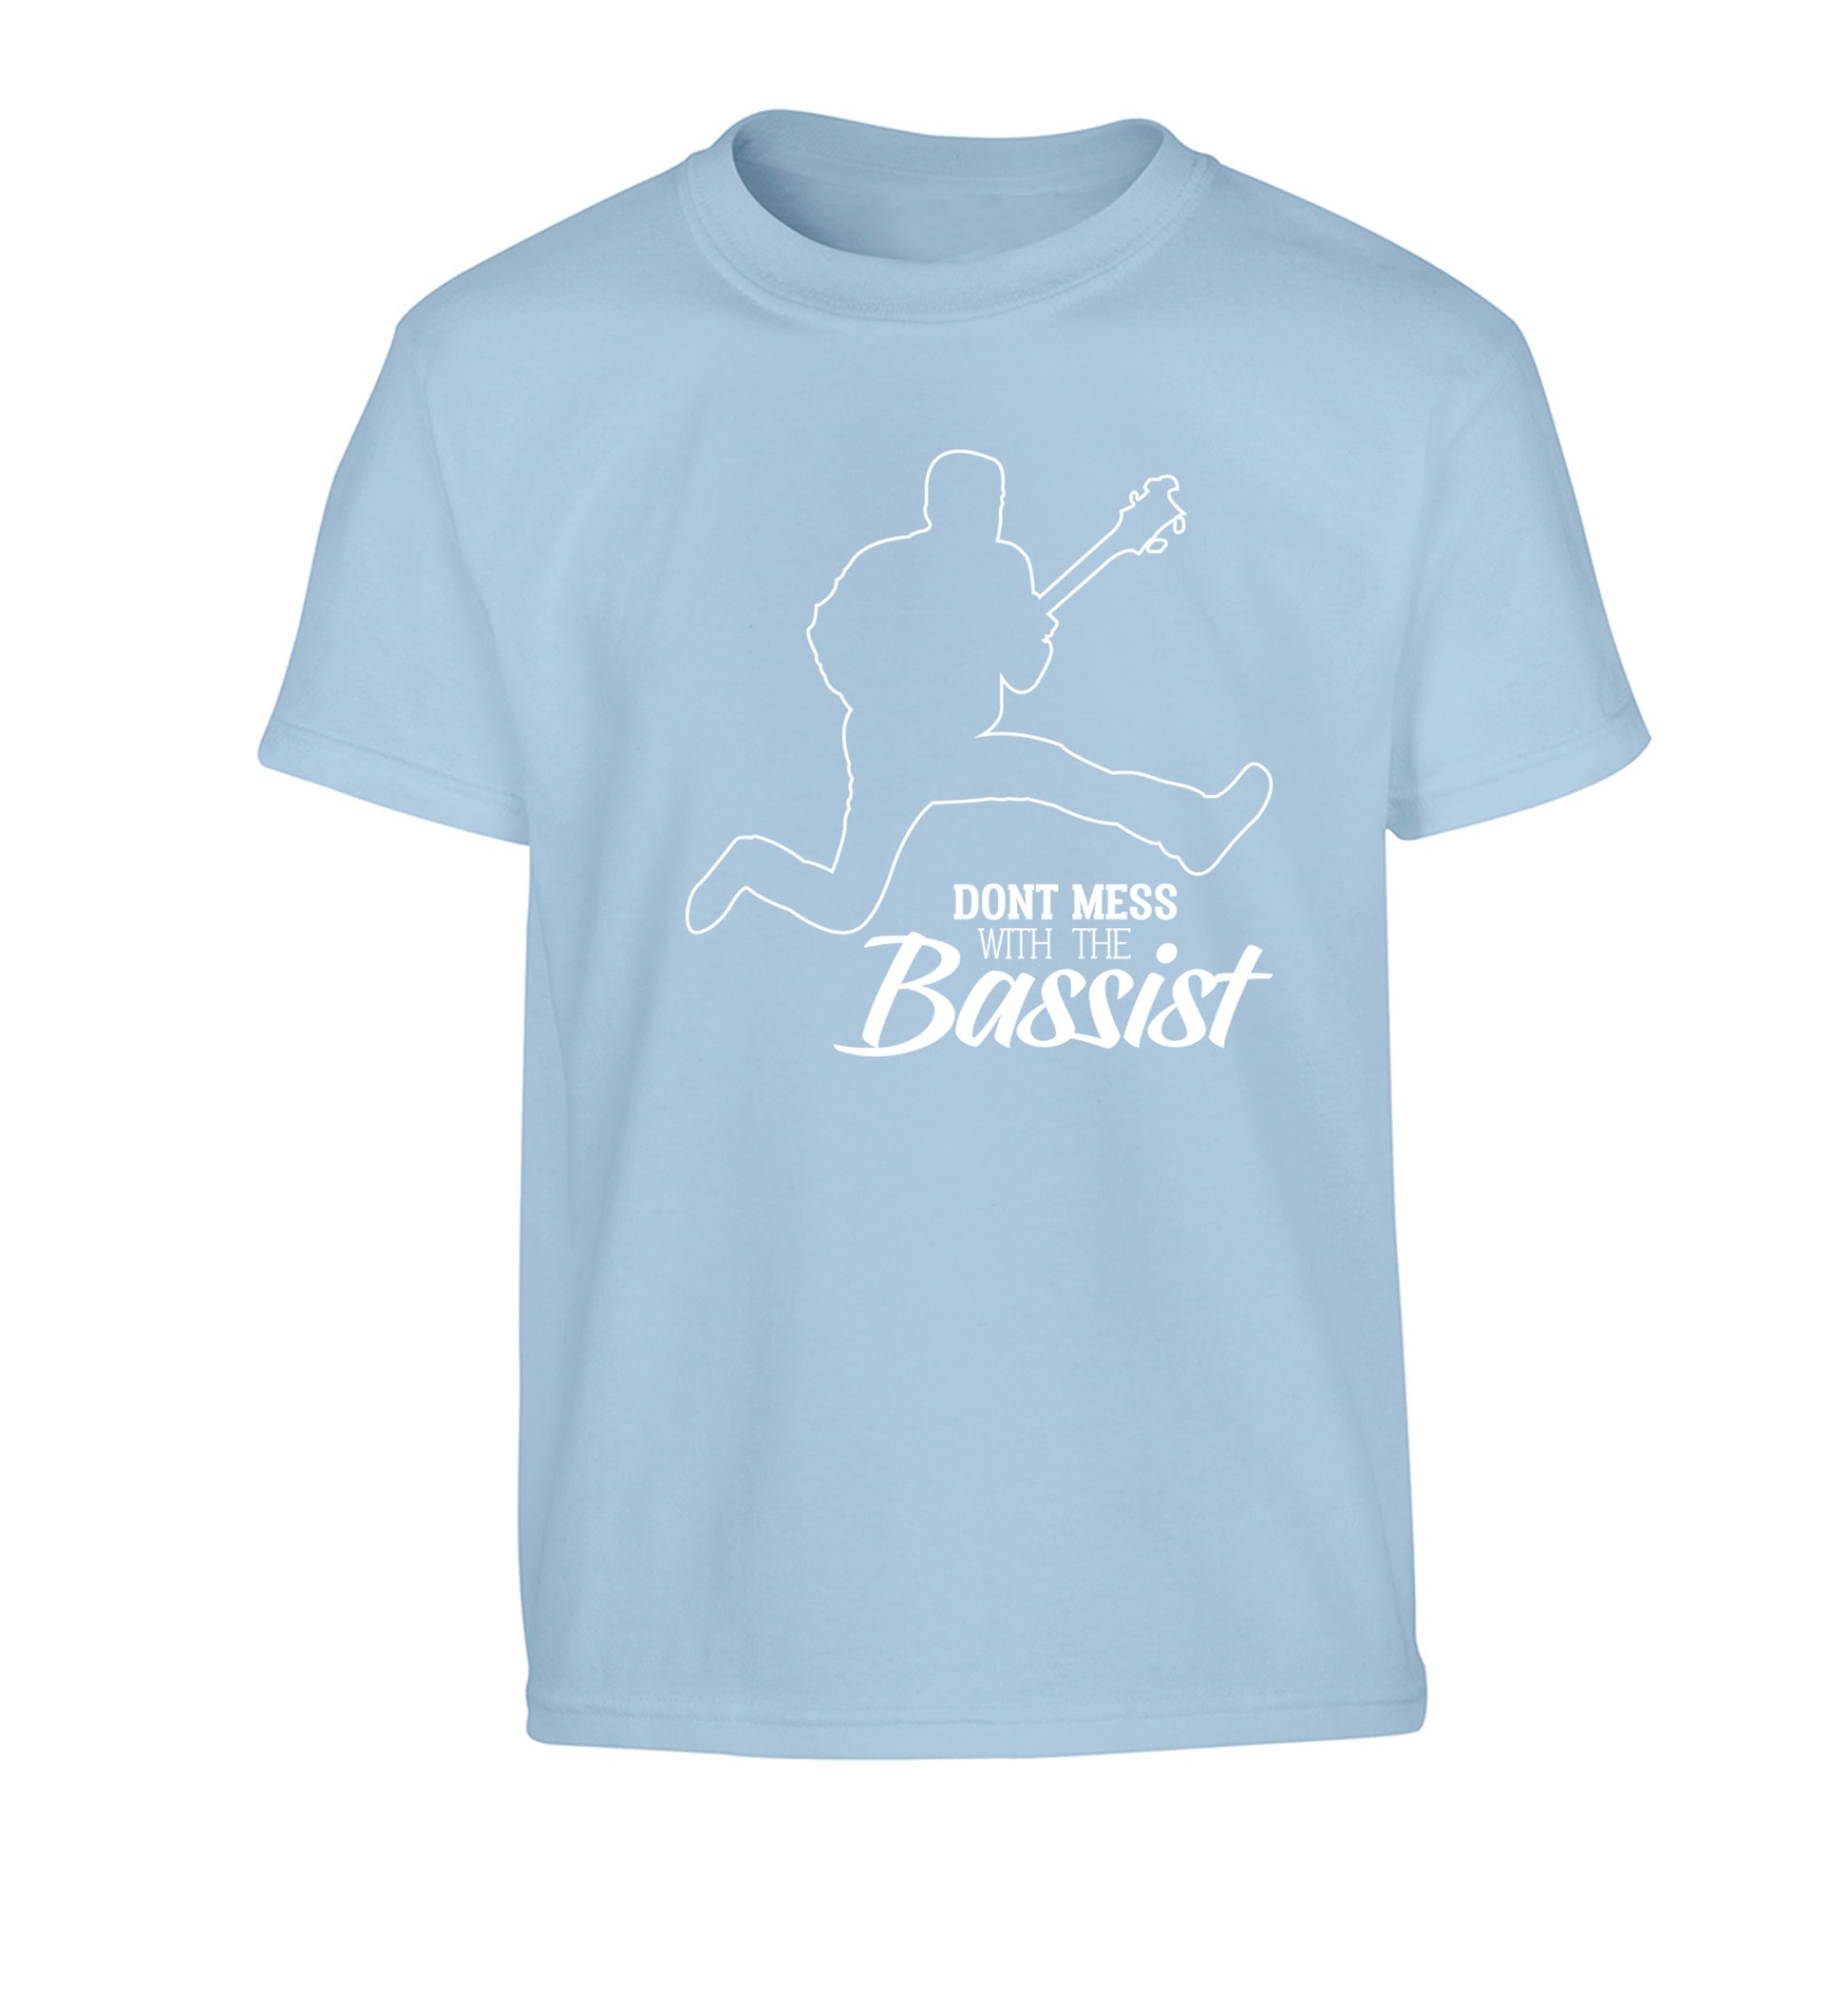 Dont mess with the bassist Children's light blue Tshirt 12-13 Years